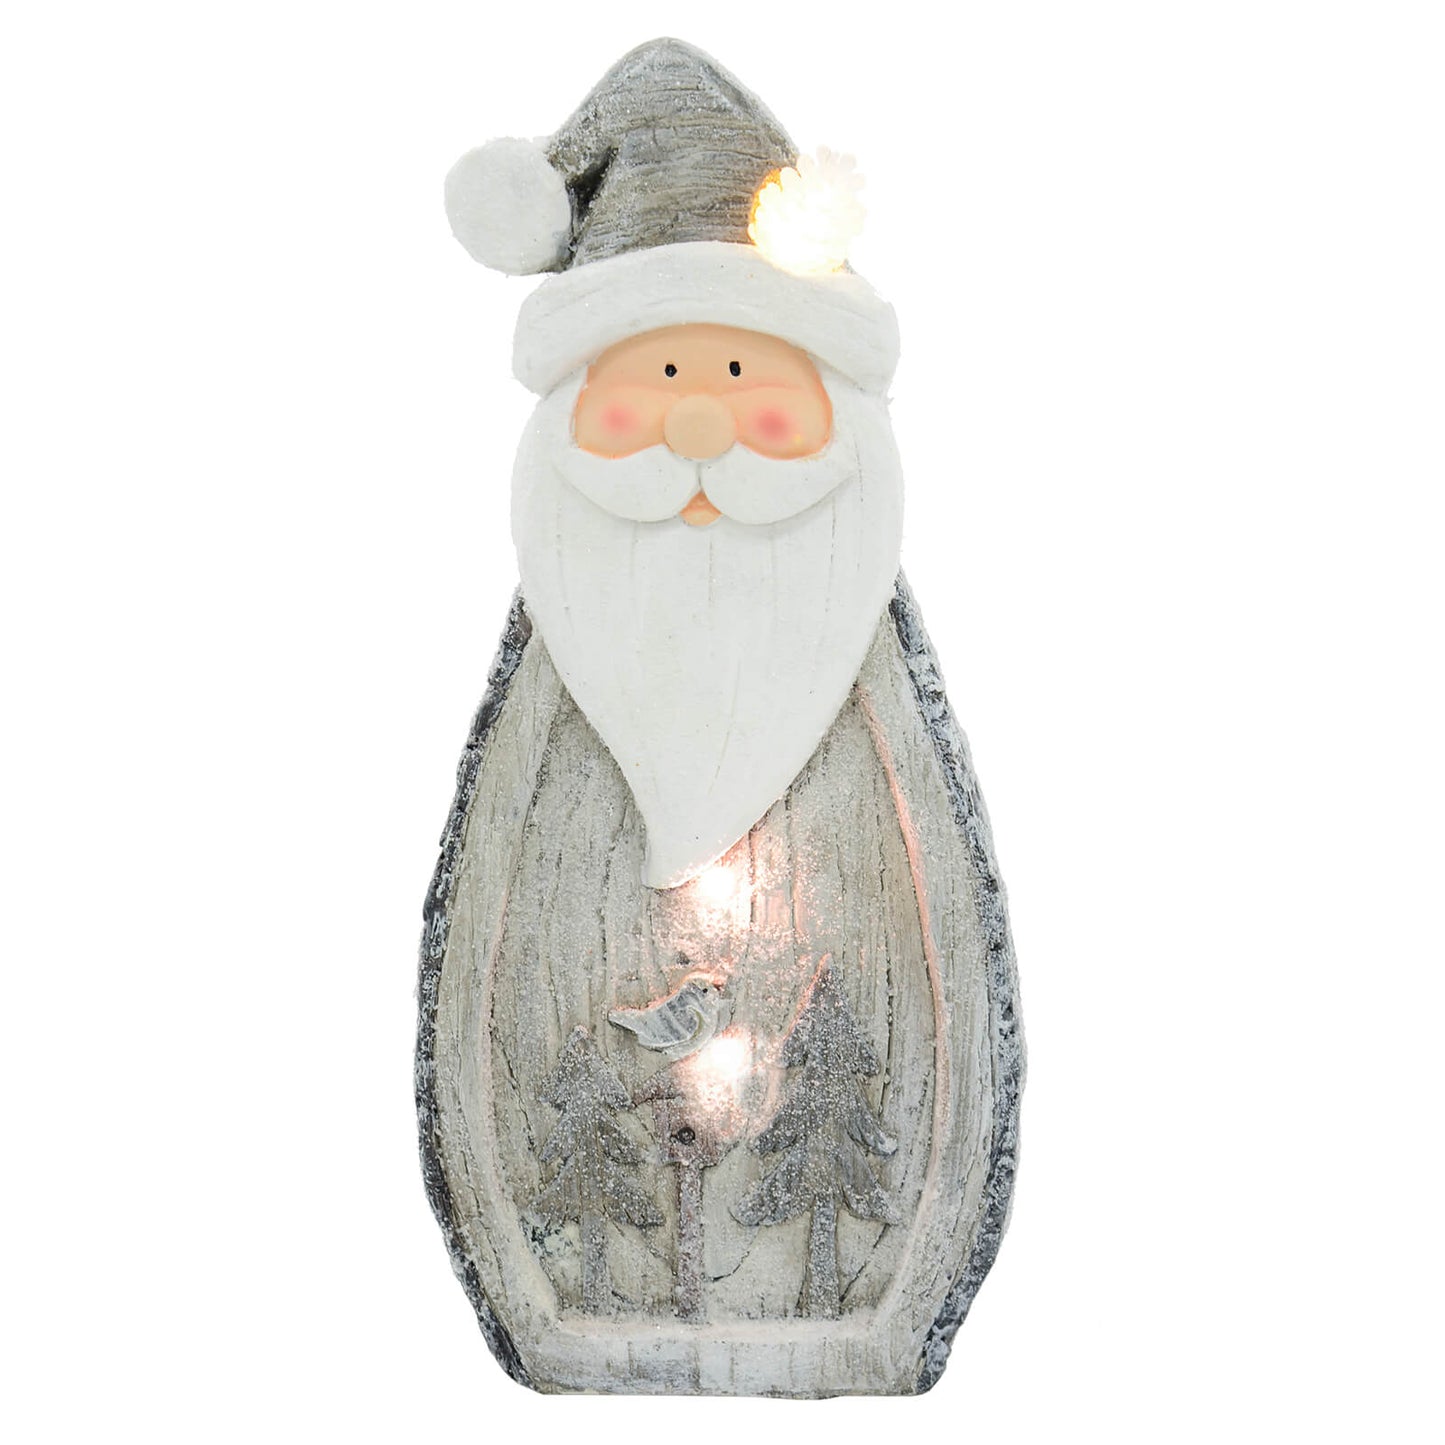 Light up grey and white Santa ornament with warm white LED pine cone, bird house and trees snow scene